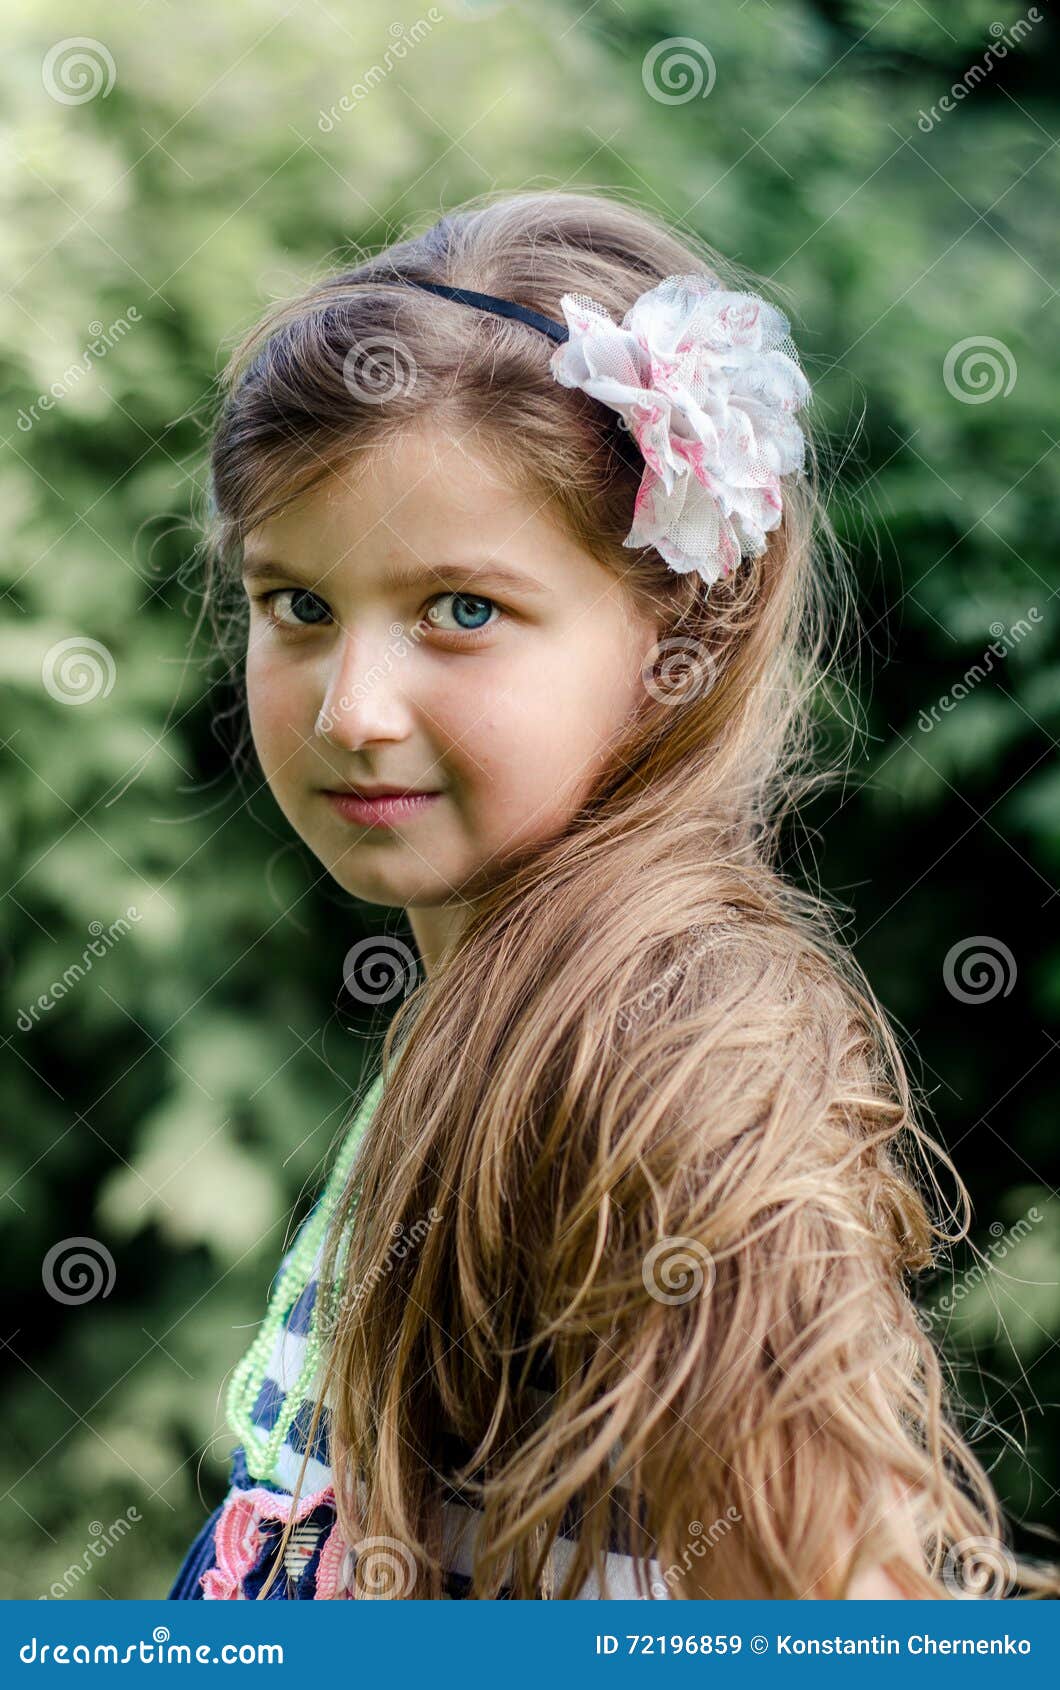 Cute Little Girl Summer Portrait. Stock Image - Image of face ...